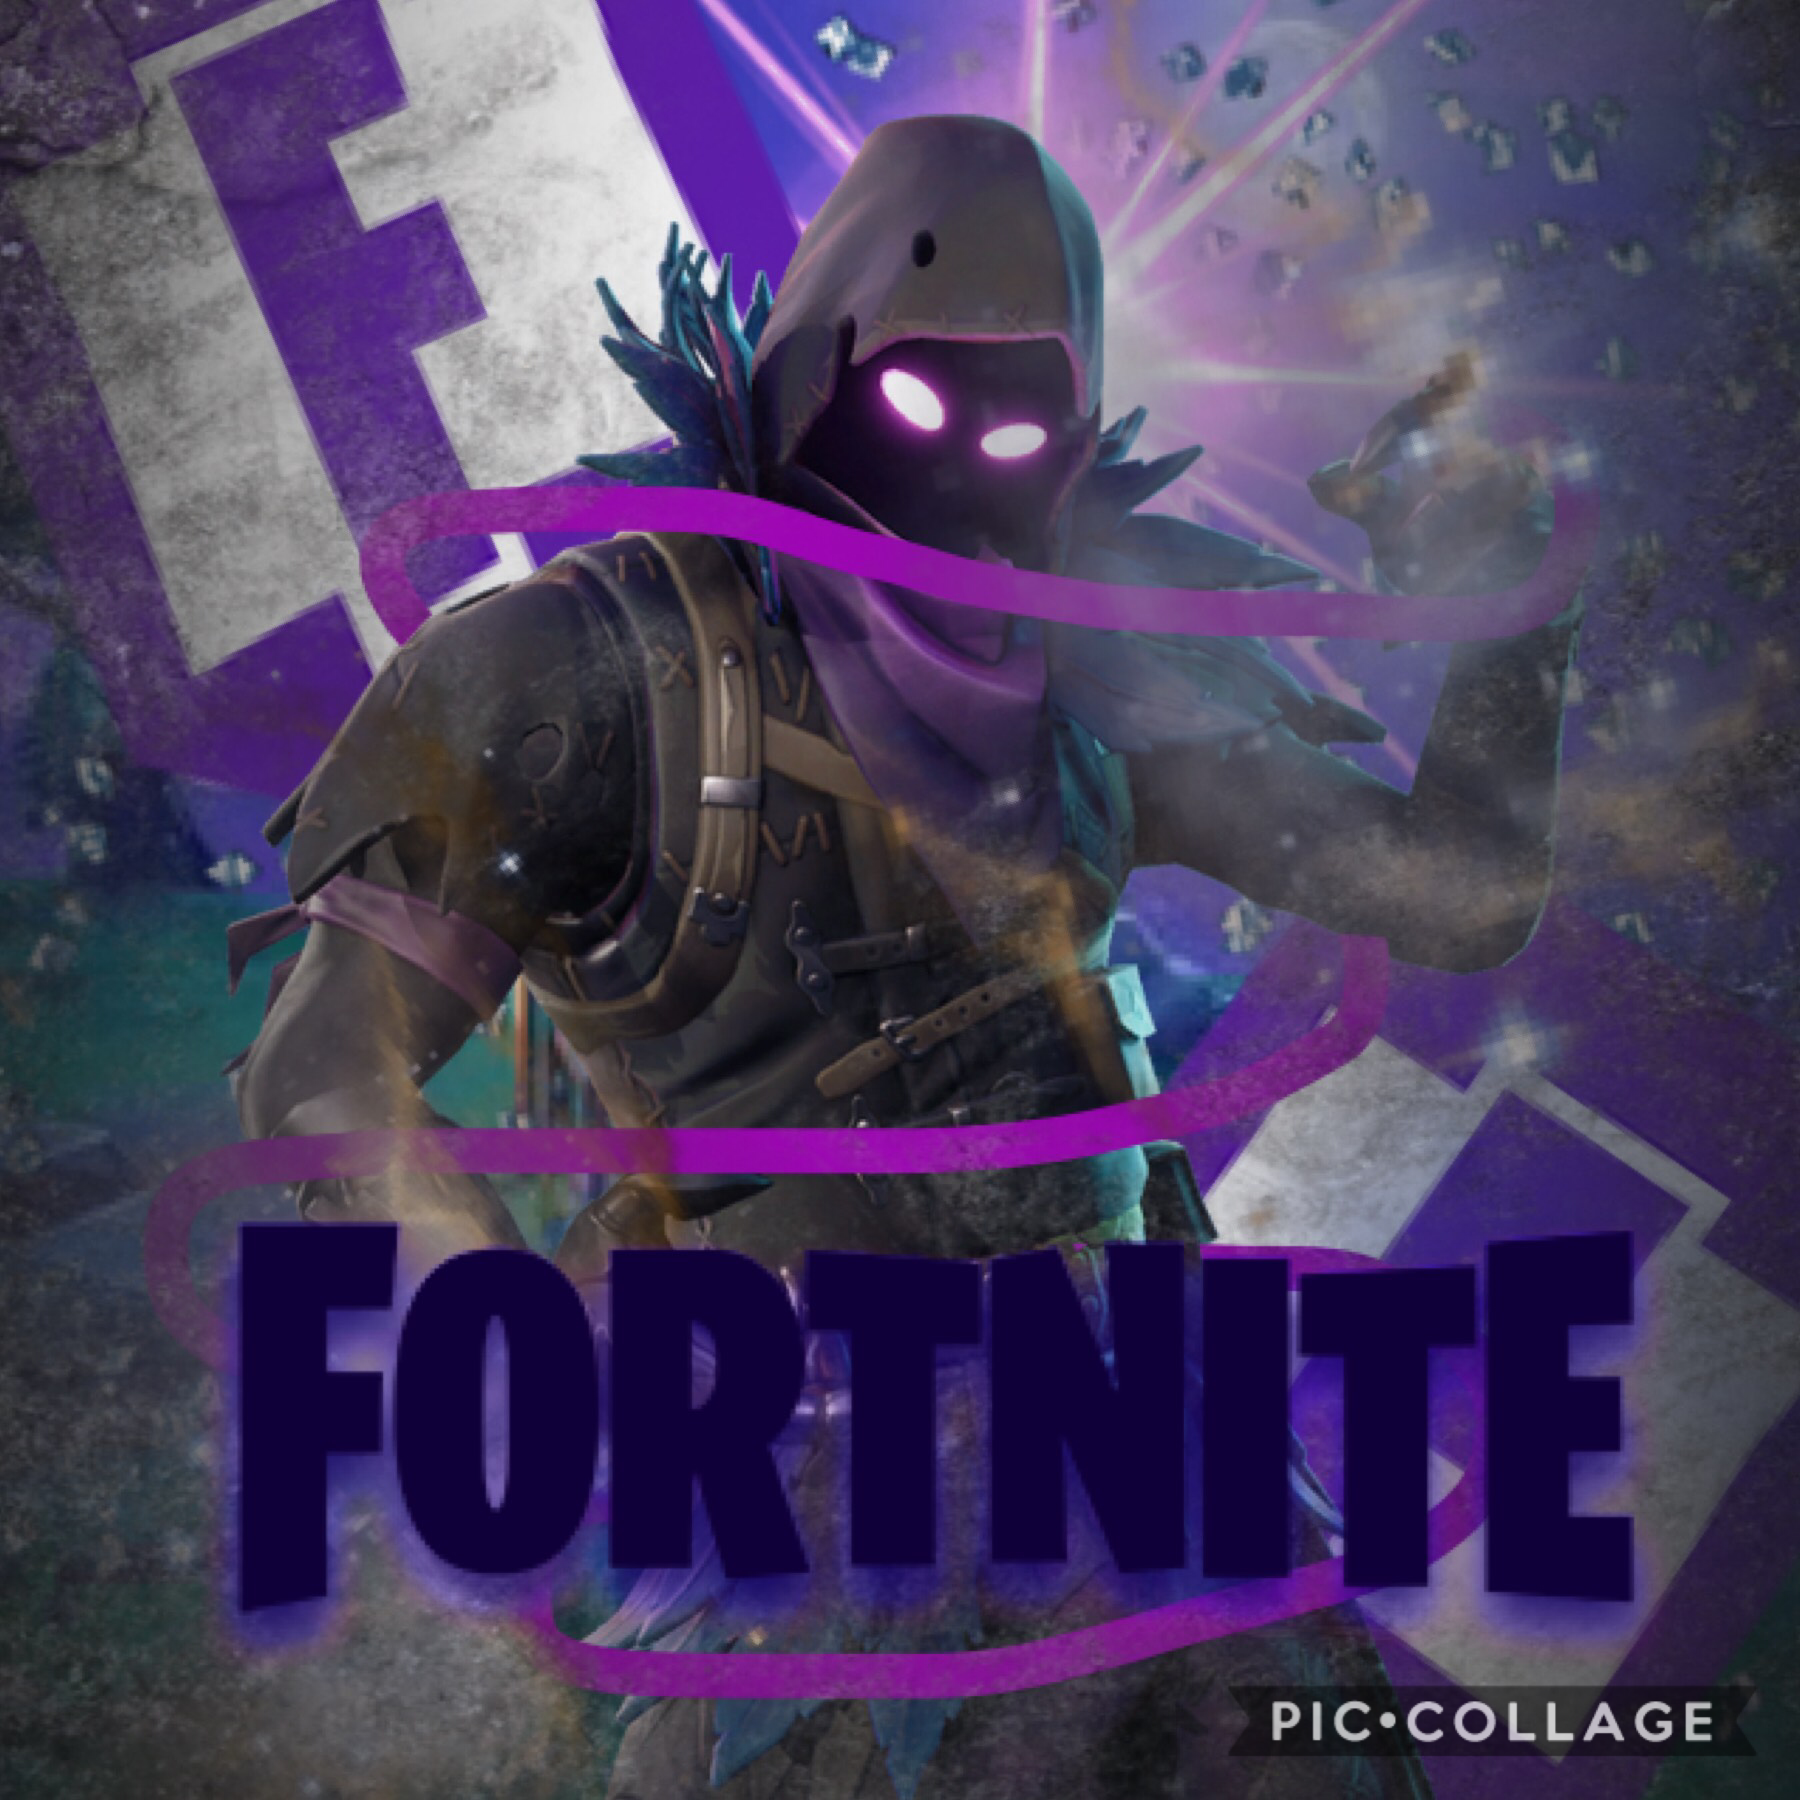 😂tap😂
When ur cousin challenges you to make a fortnite collage... I tried 😂